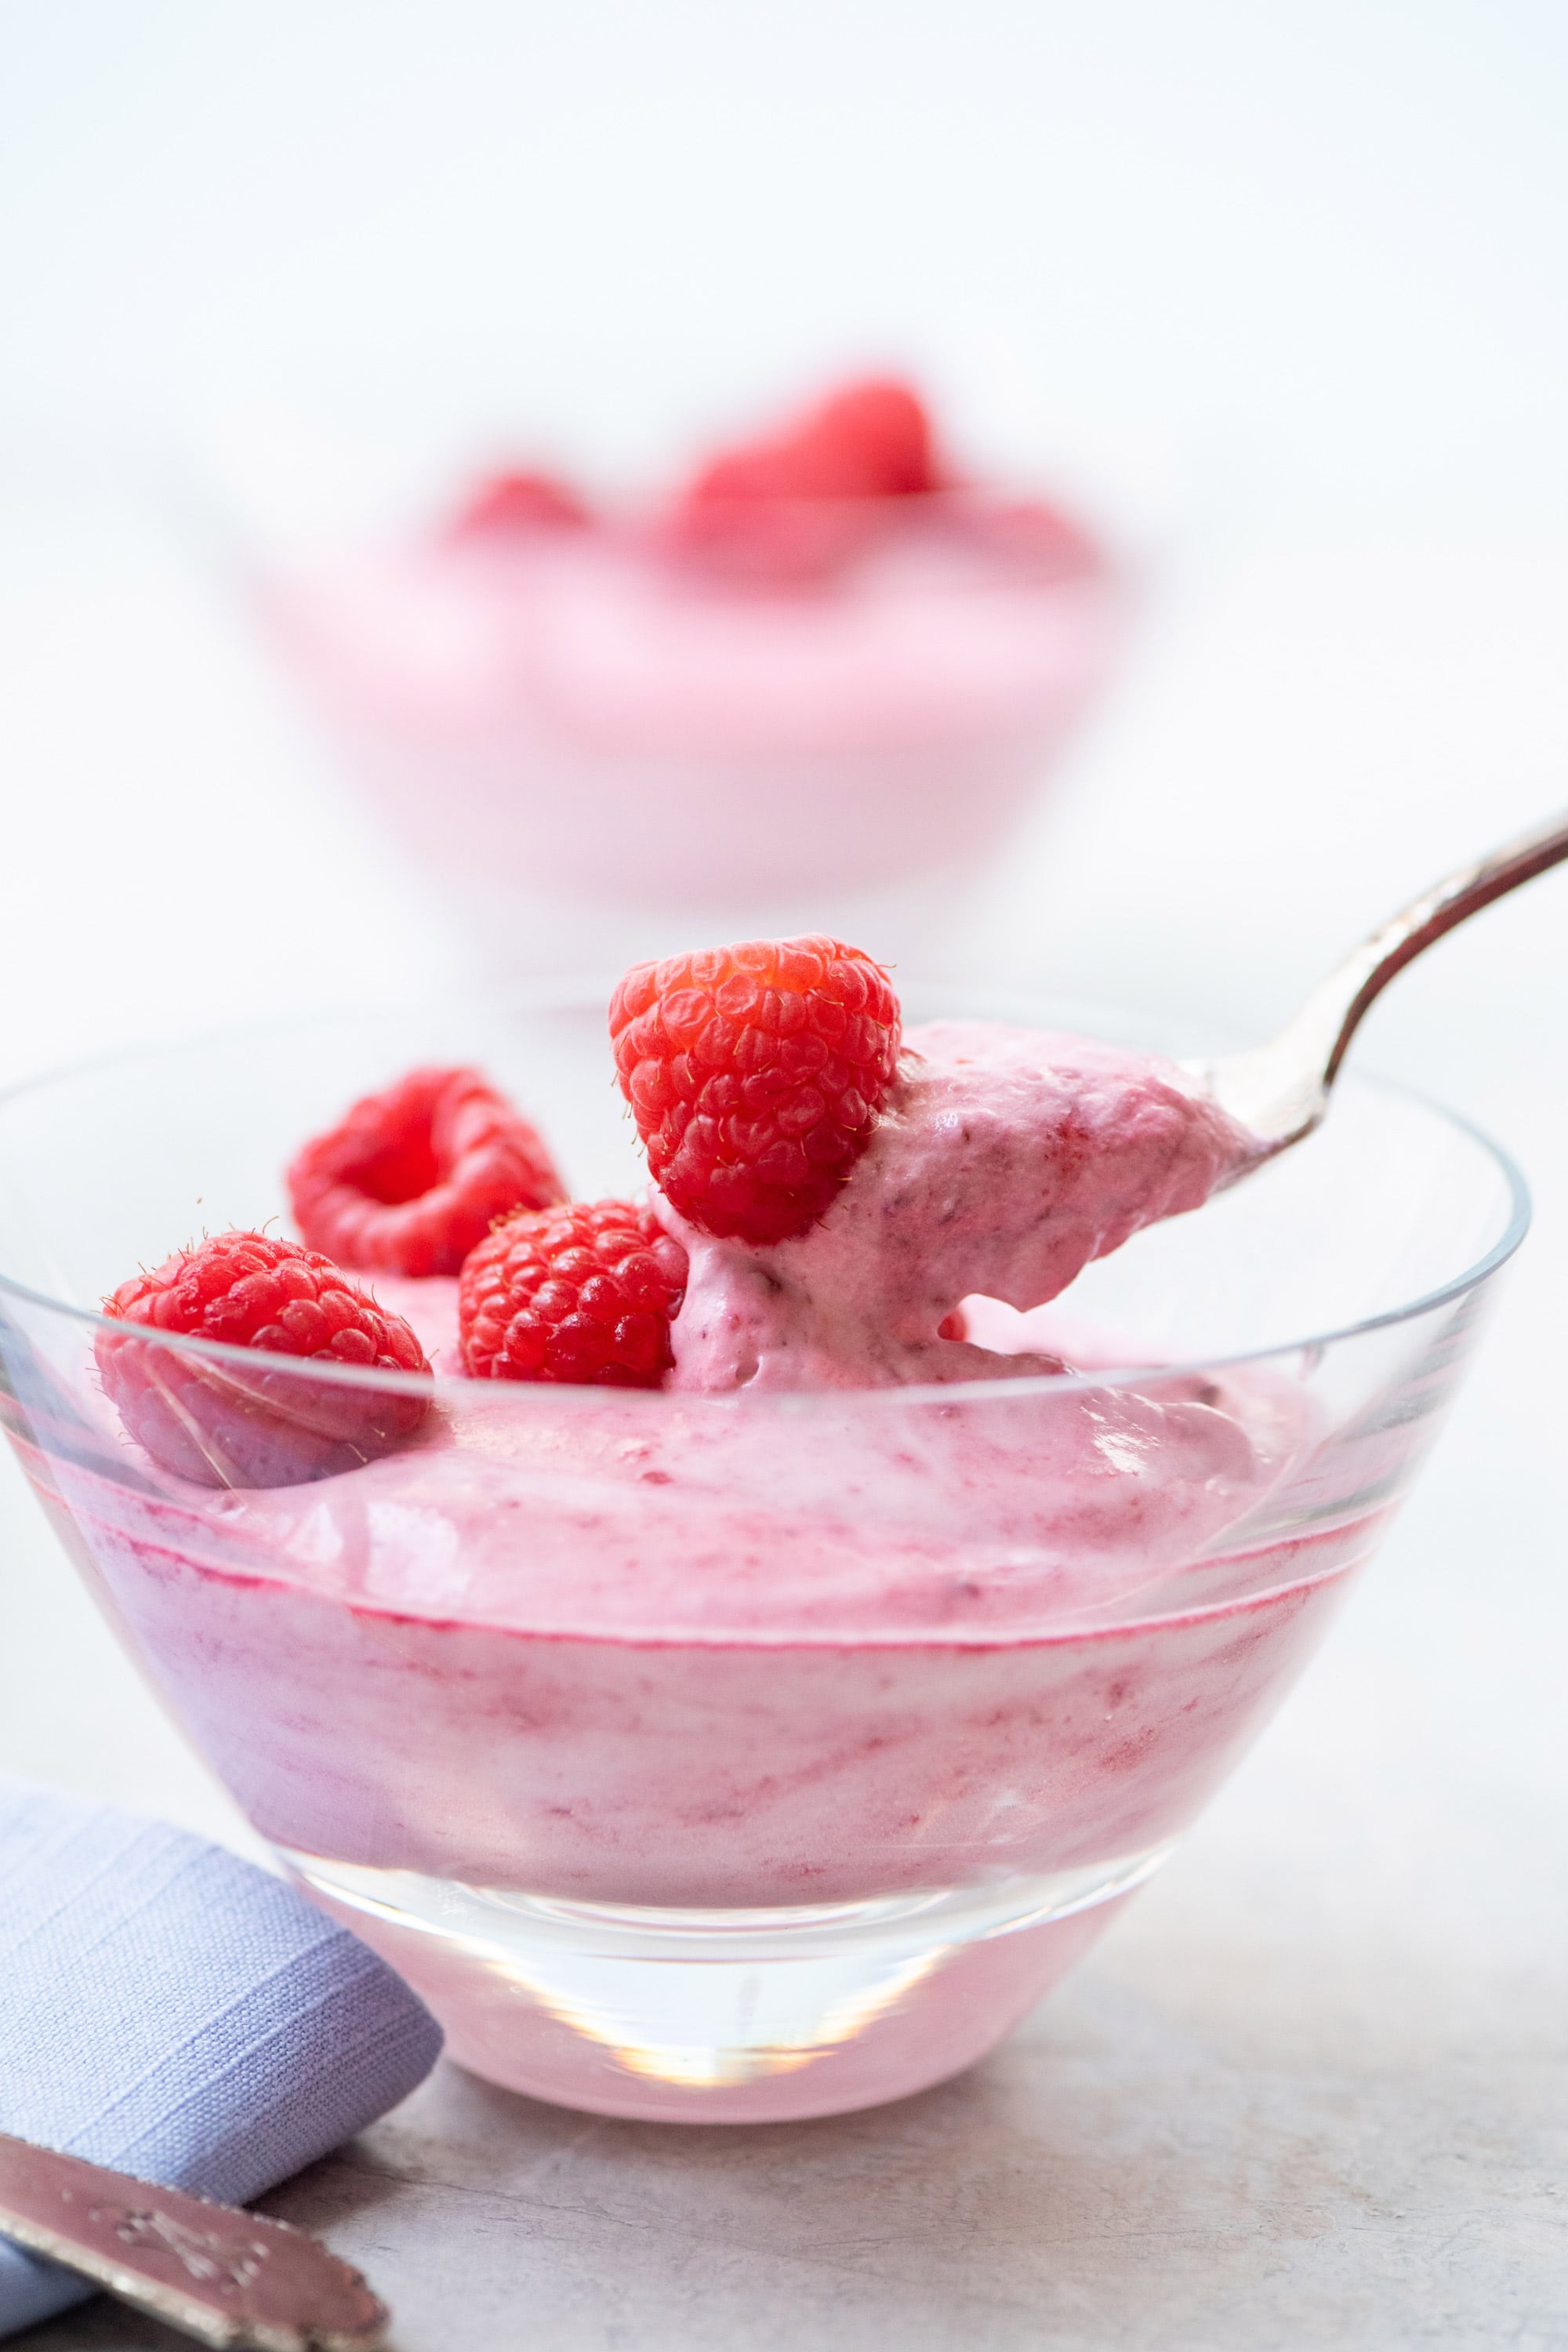 Eating fresh berry-topped raspberry fool with spoon.